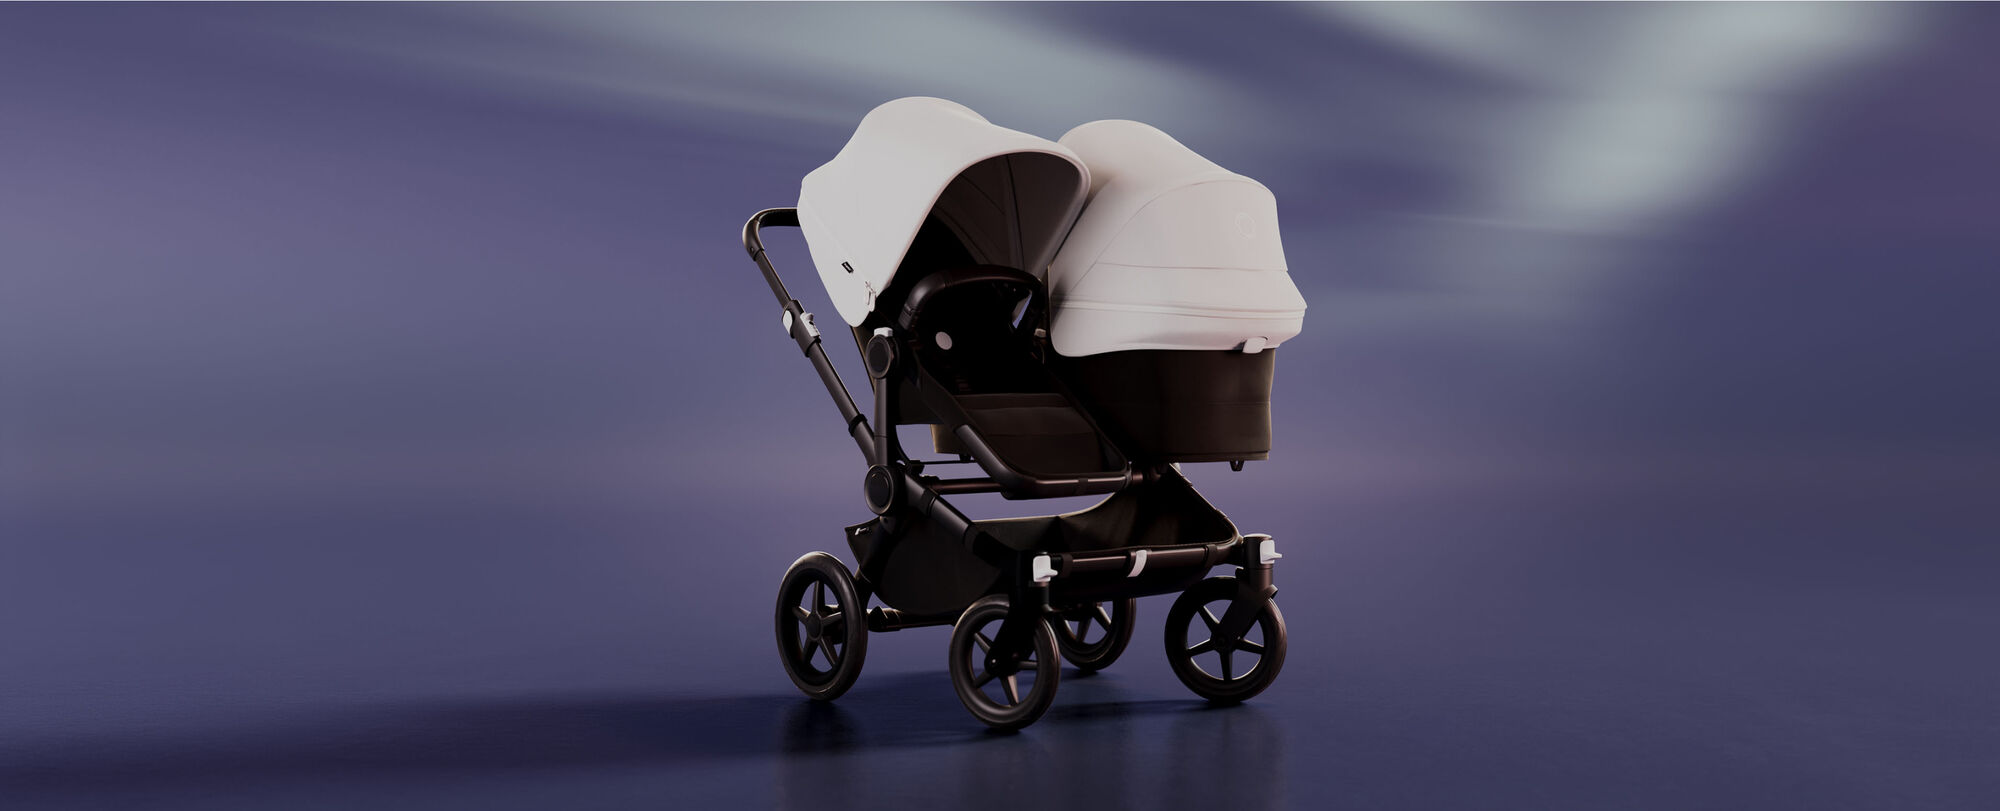 A Bugaboo Donkey 5 Duo pram with a seat and a bassinet. The sun canopy is in Misty White. The background is blue with streaks of white.